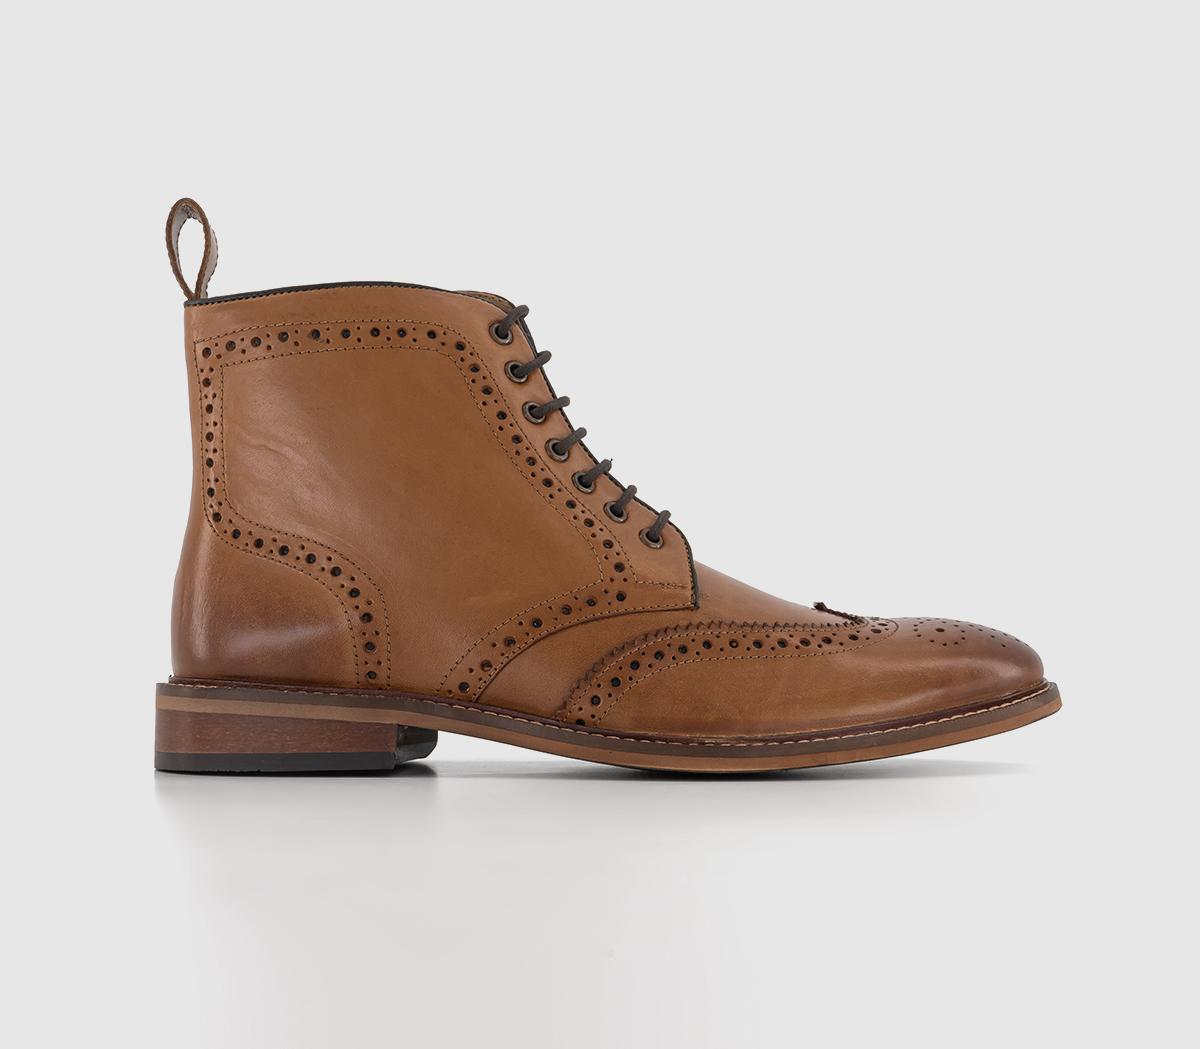 OFFICEBladon Brogue Lace Up BootsTan Leather